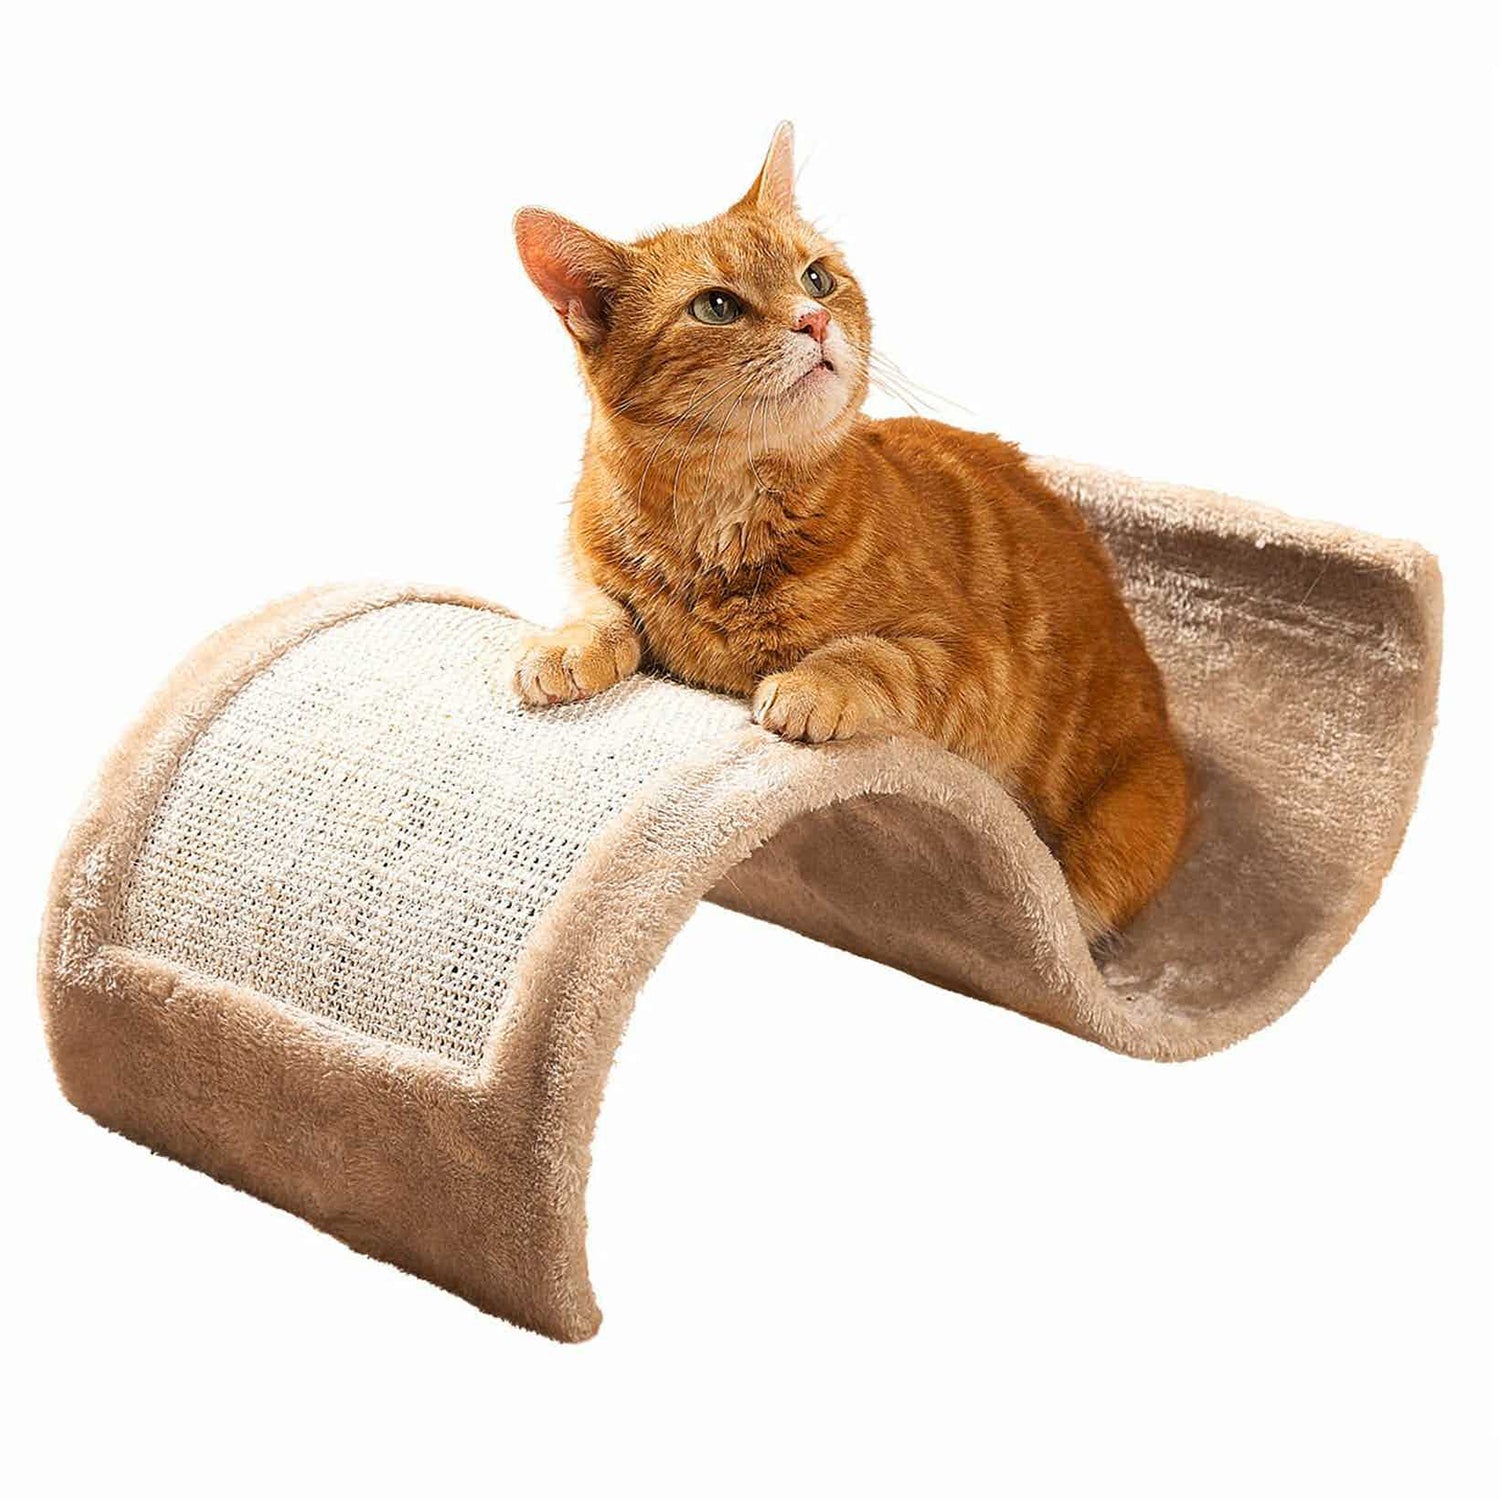 PETCOMER PET TRAVELER Cat Scratching Post Wave, Indoor Cat Toys and Bed & Pet Play Towers, Beige, 11.25"L x 19.5"W x 7"H